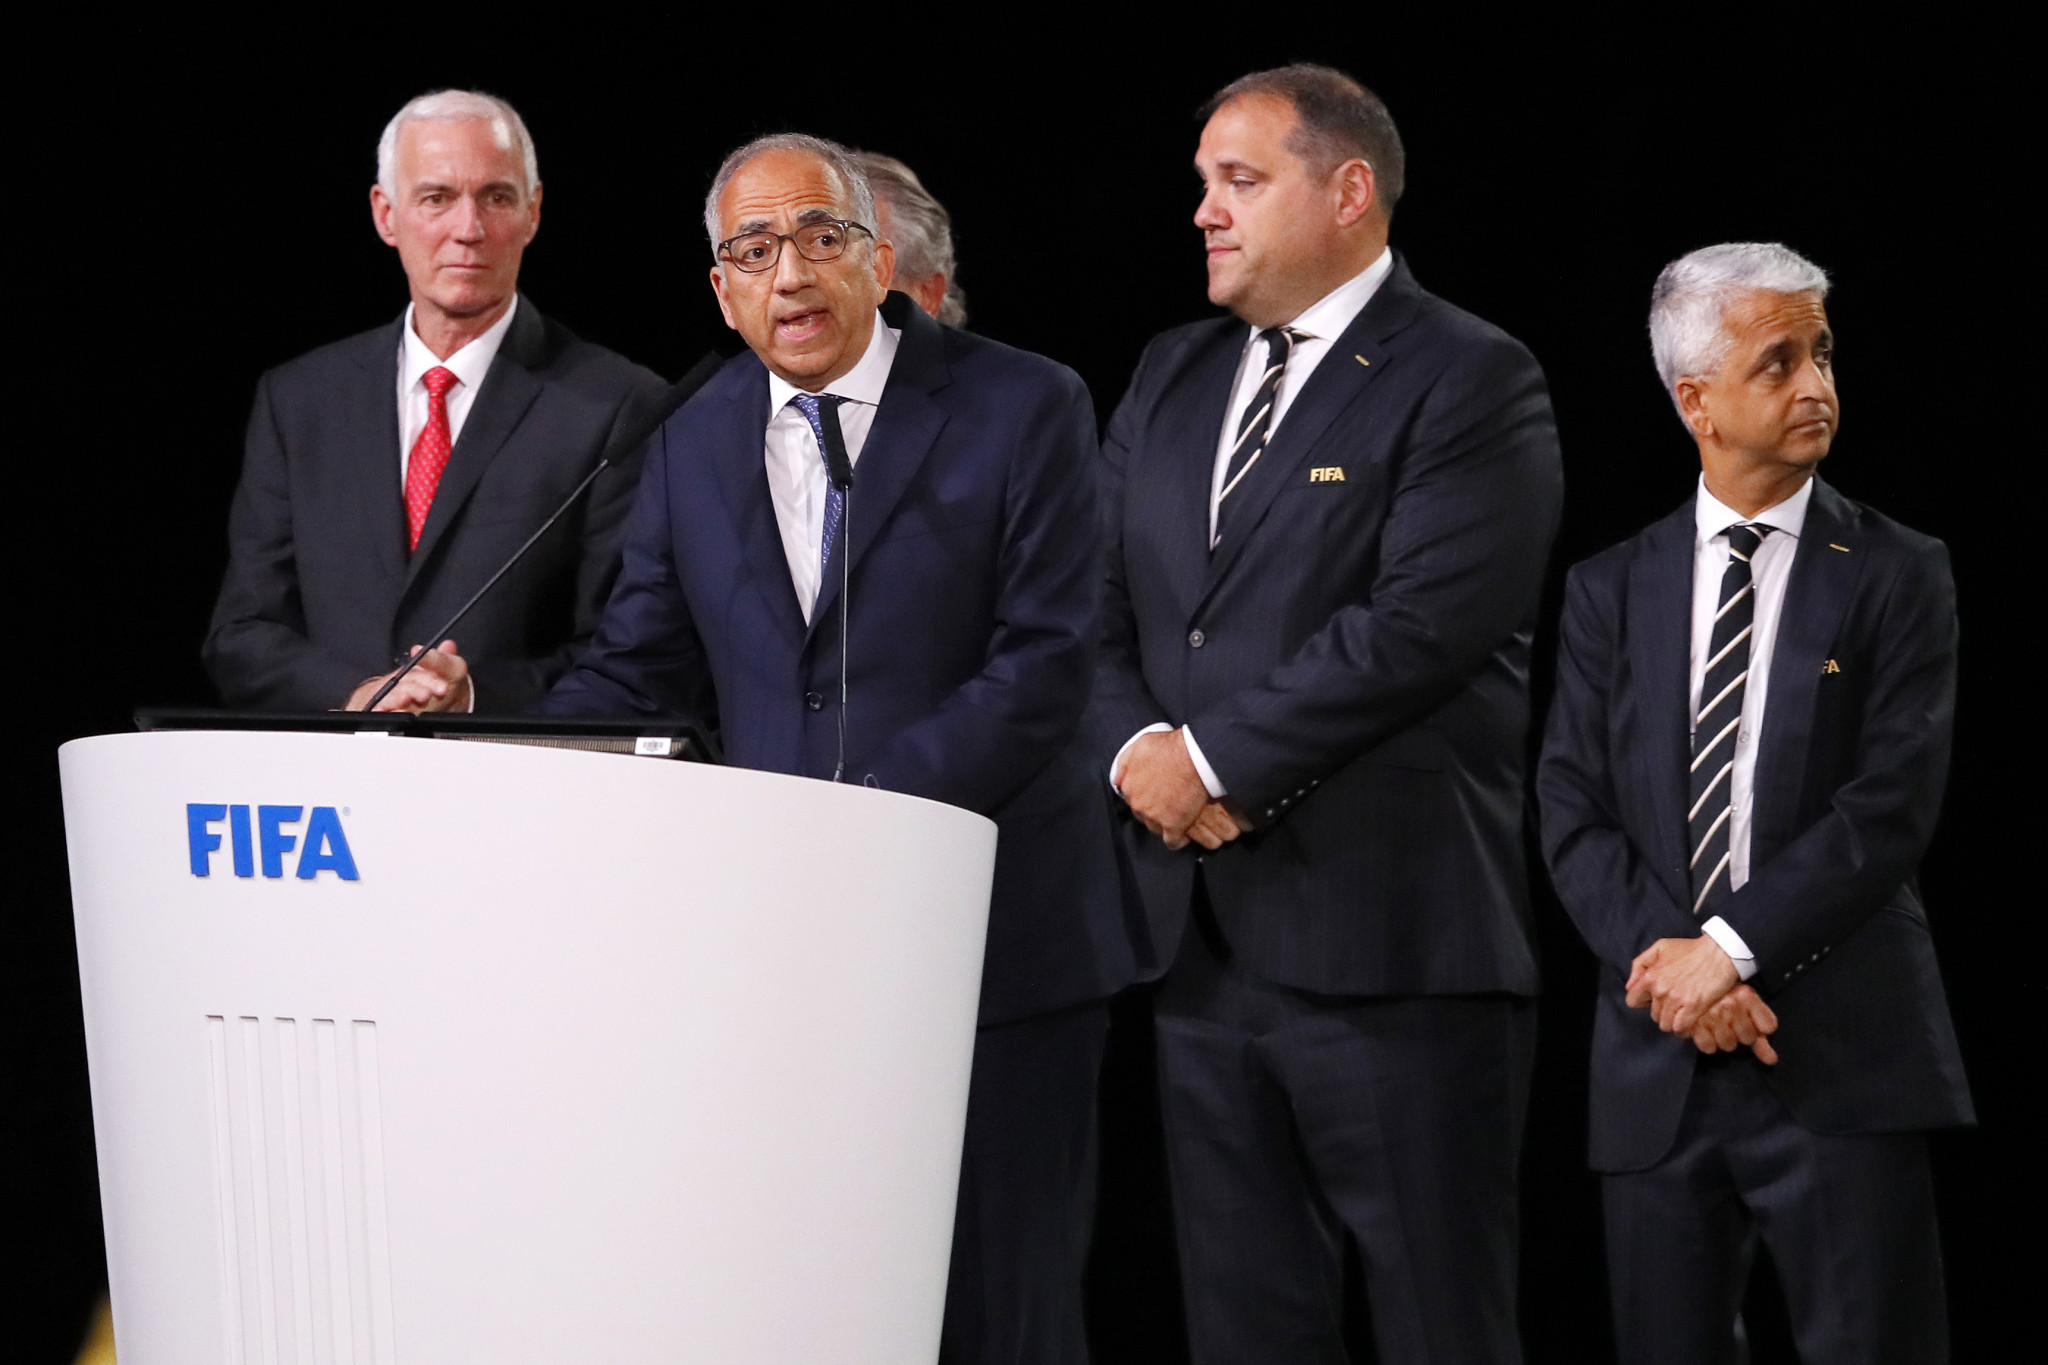 North American bidding officials speak after being awarded the World Cup ©Getty Images